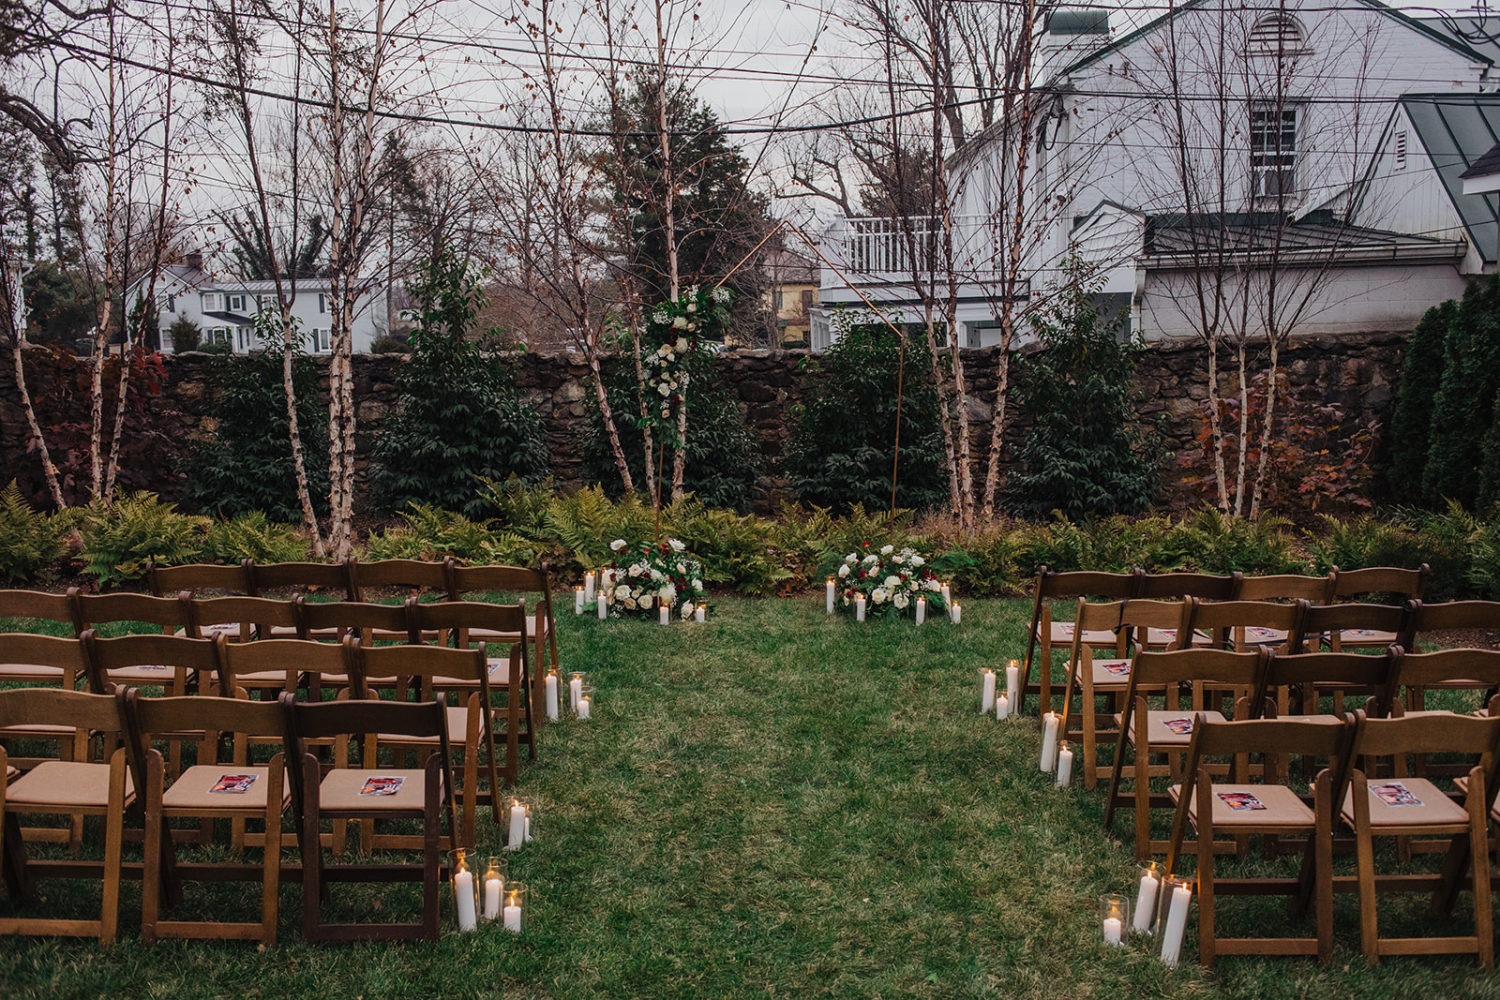 Setup of chairs and wedding florals for wedding ceremony